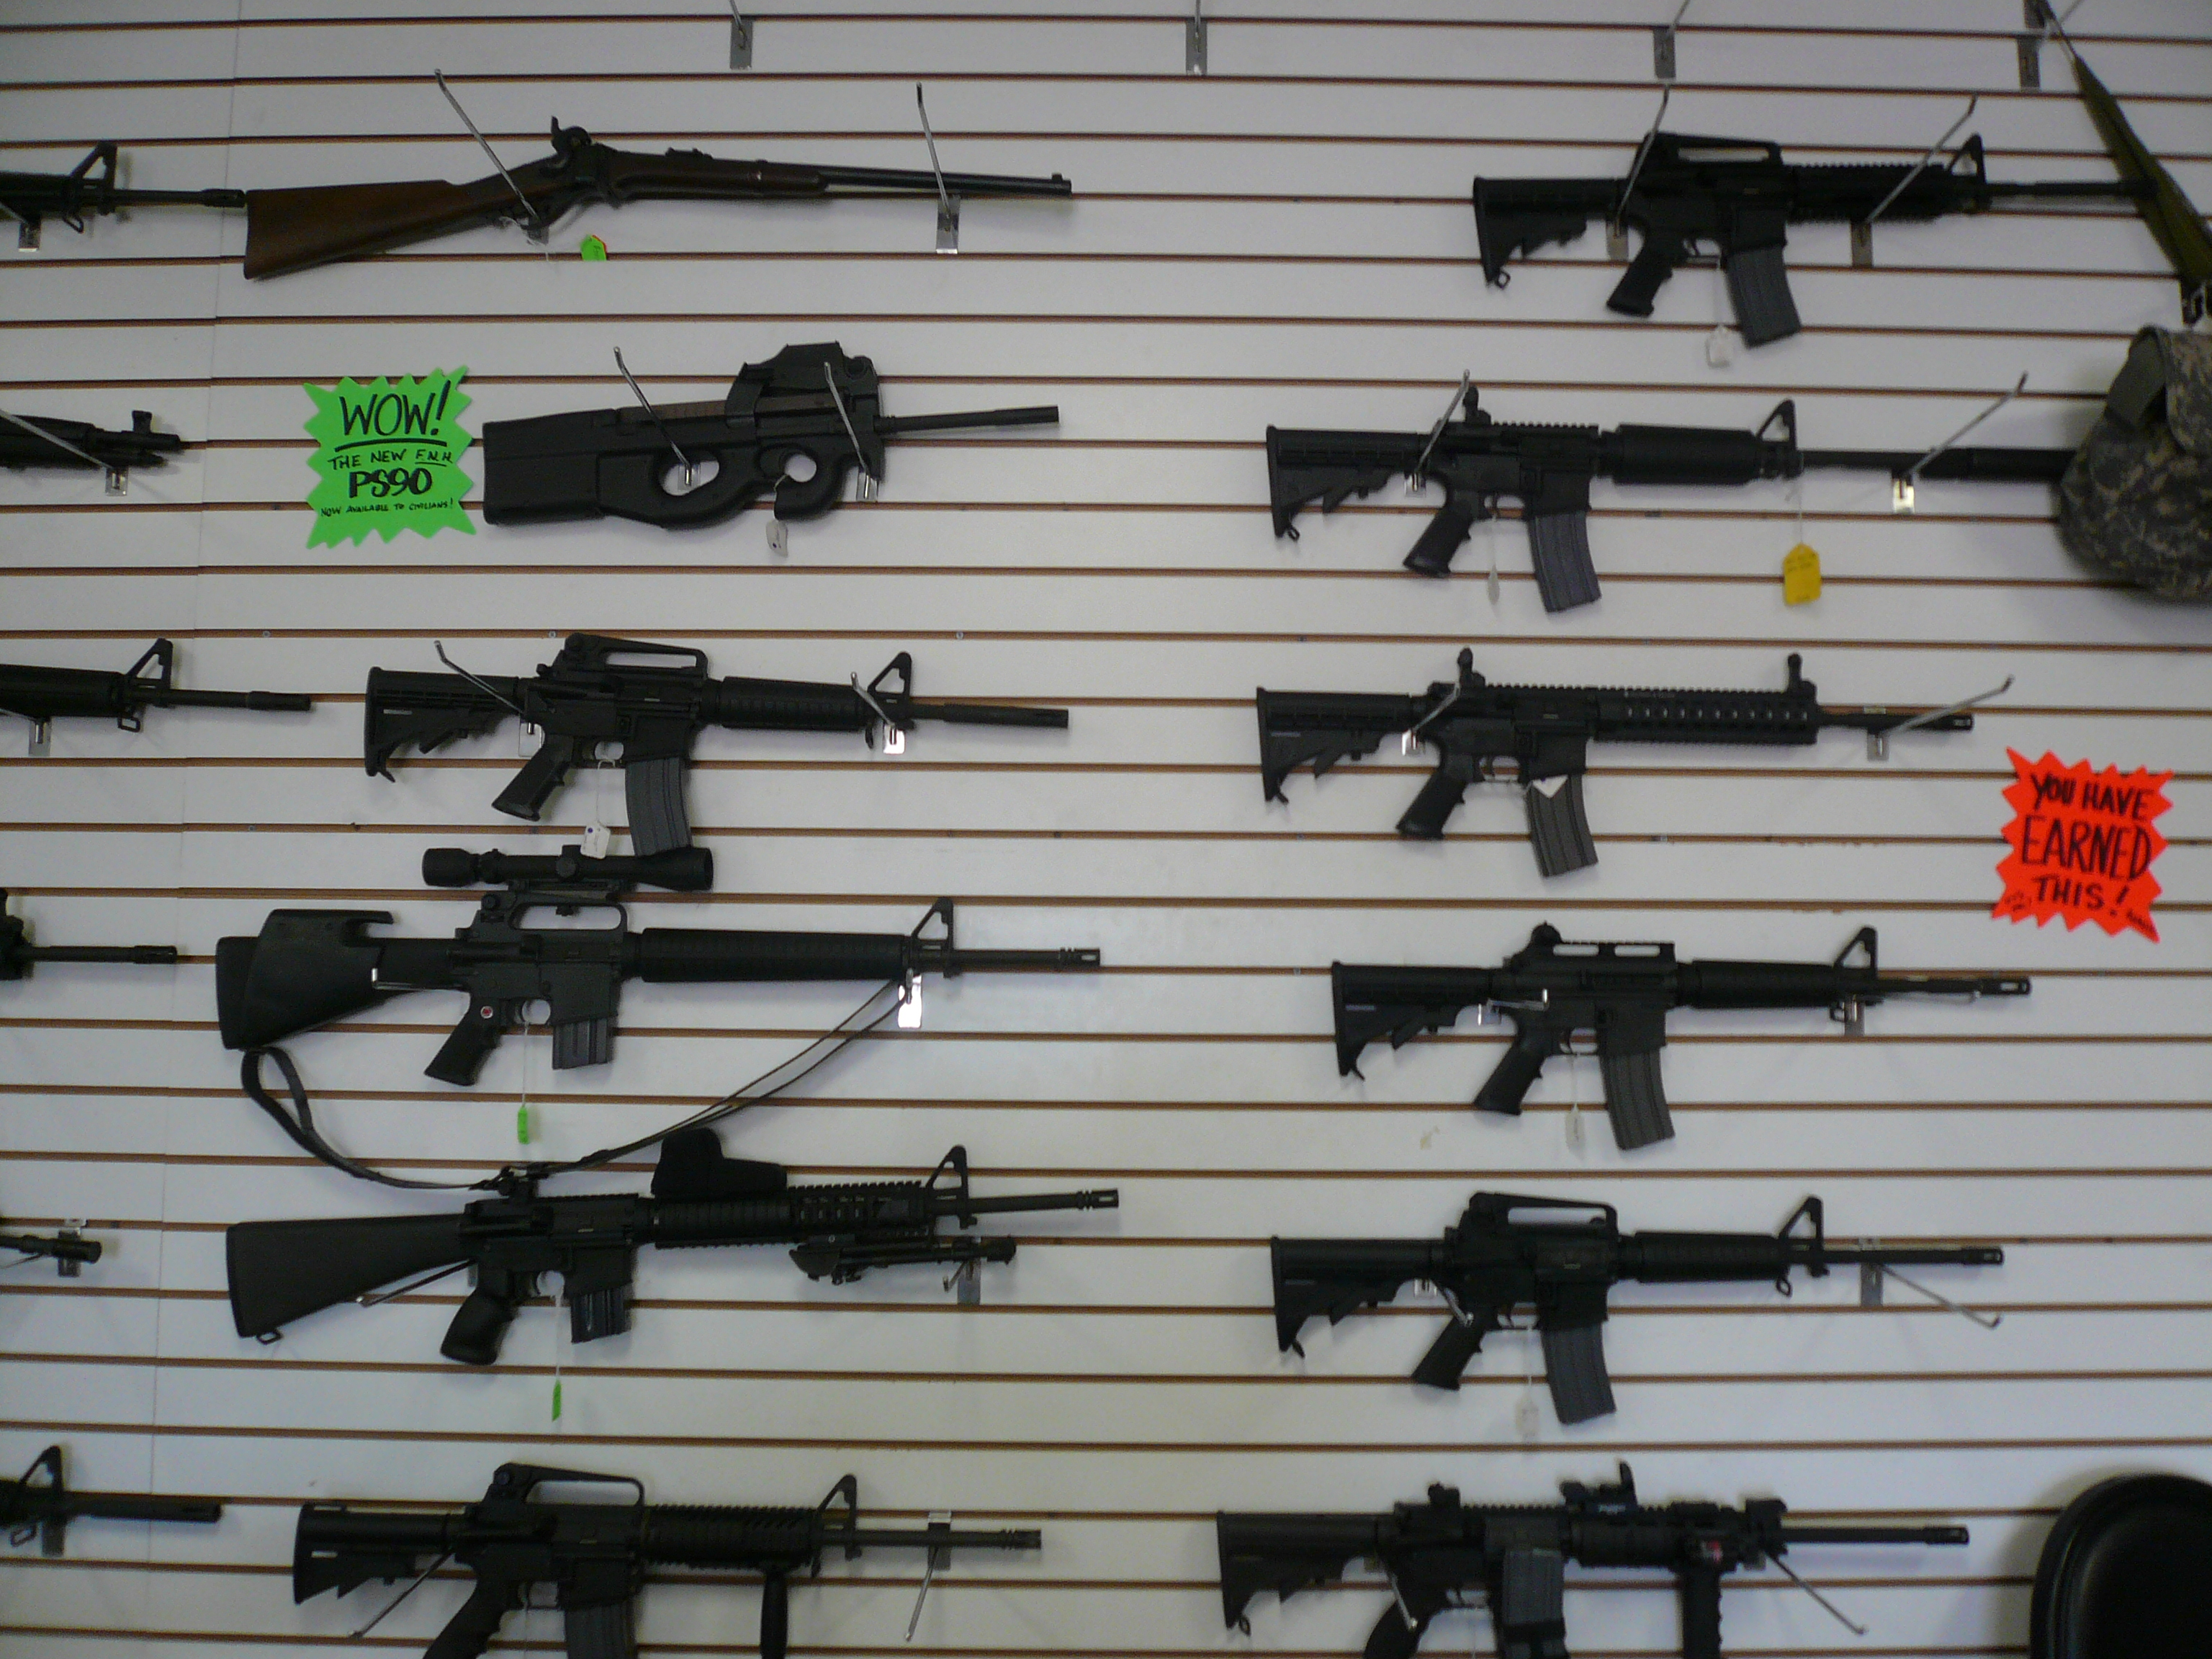 Guns for sale in Las Vegas, many are then smuggled into Mexico, fueling the country's insecurity crisis.